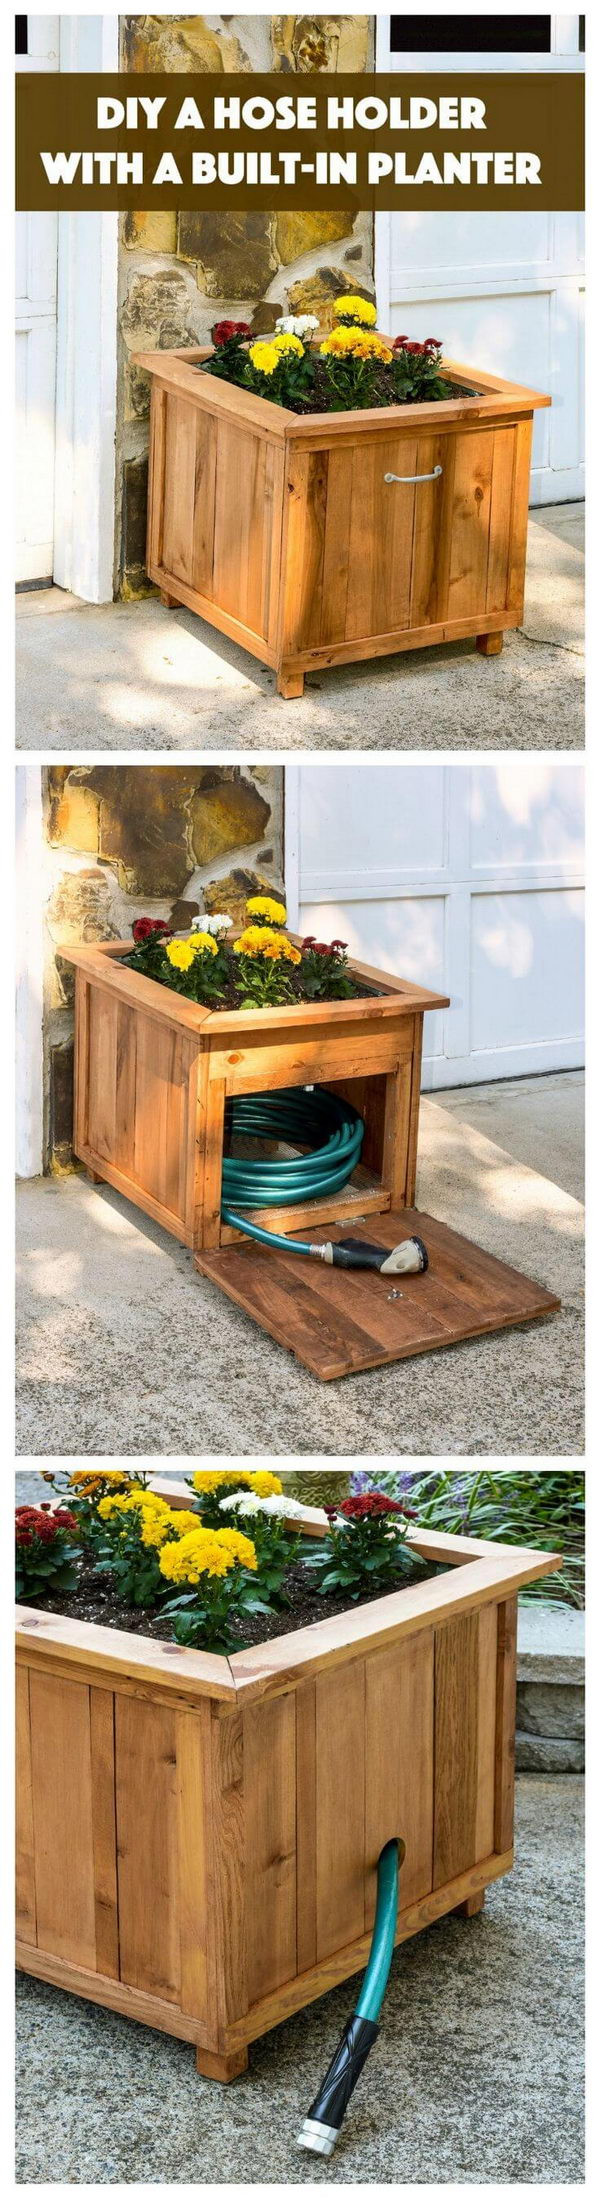 DIY Large Planter Boxes
 30 Creative DIY Wood and Pallet Planter Boxes To Style Up